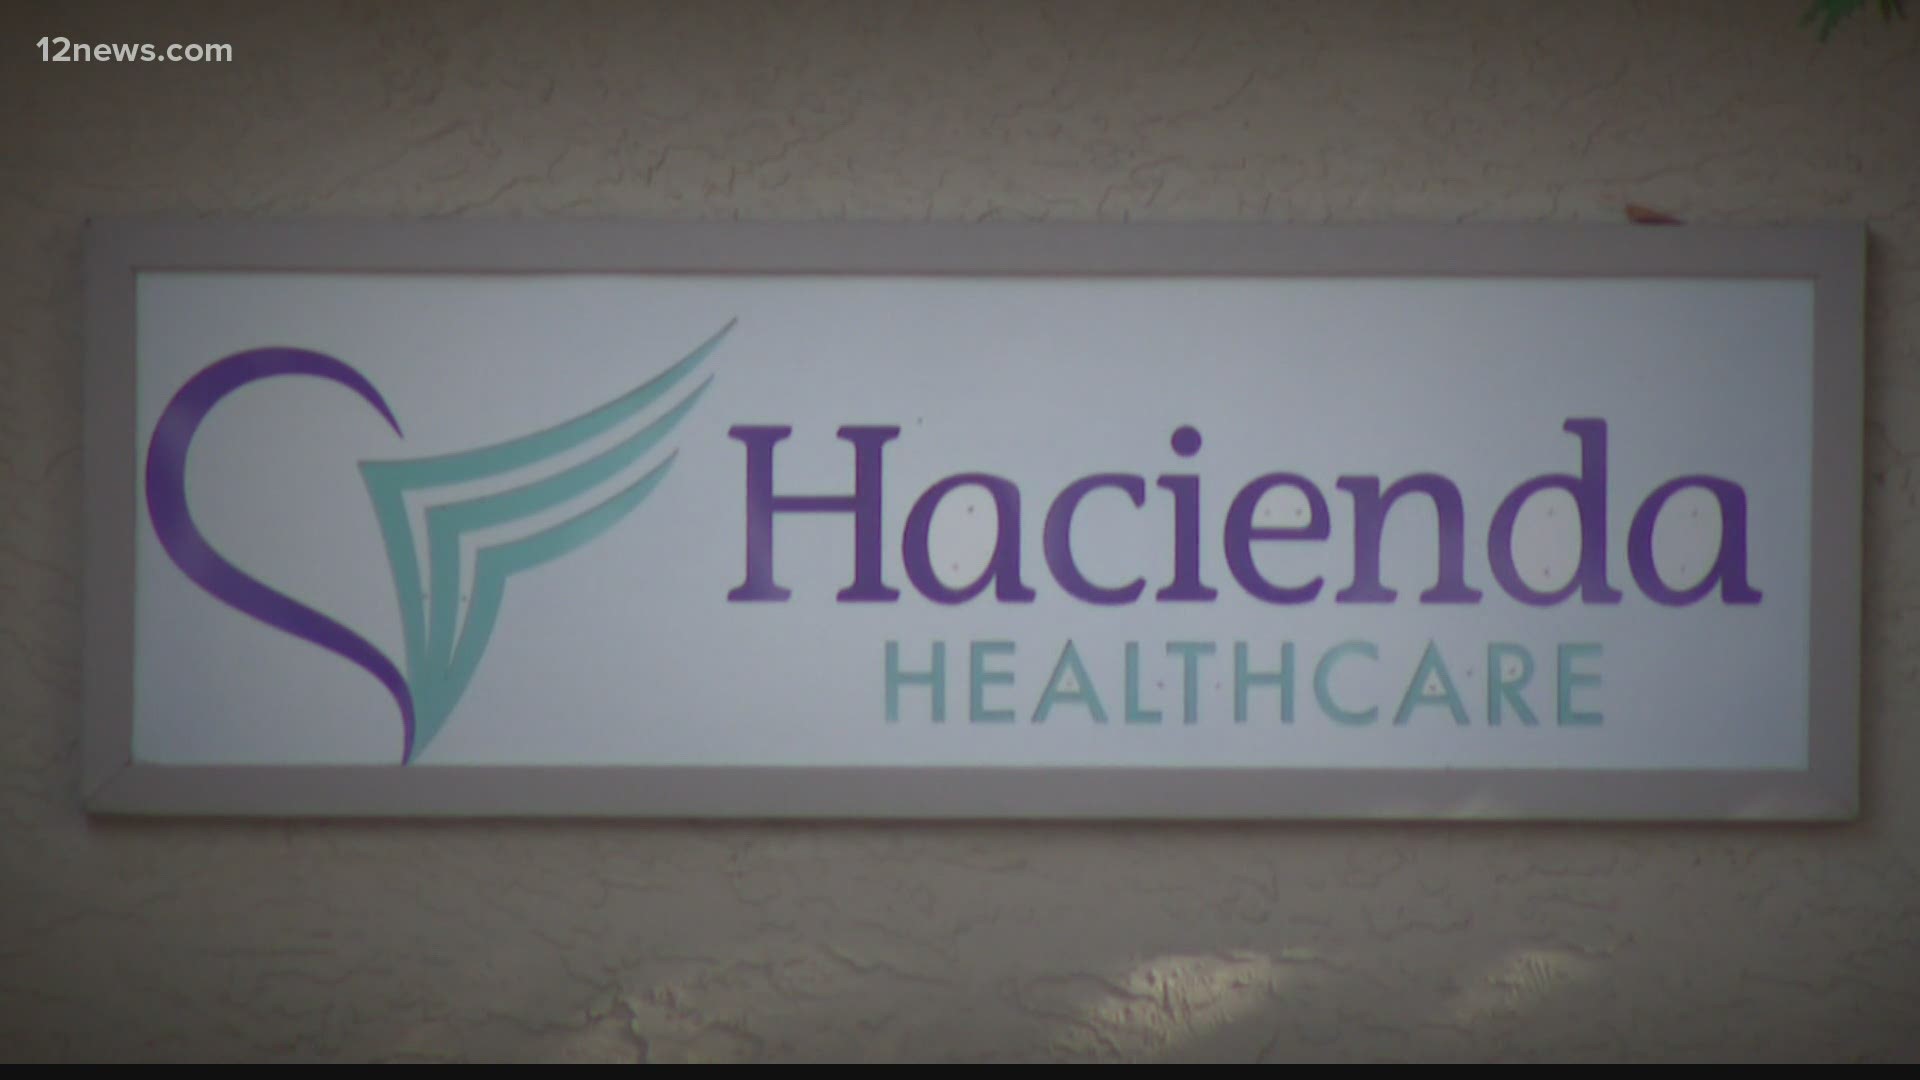 The former CEO of Hacienda, Inc. has pleaded guilty to fraud charges, according to the attorney general's office.